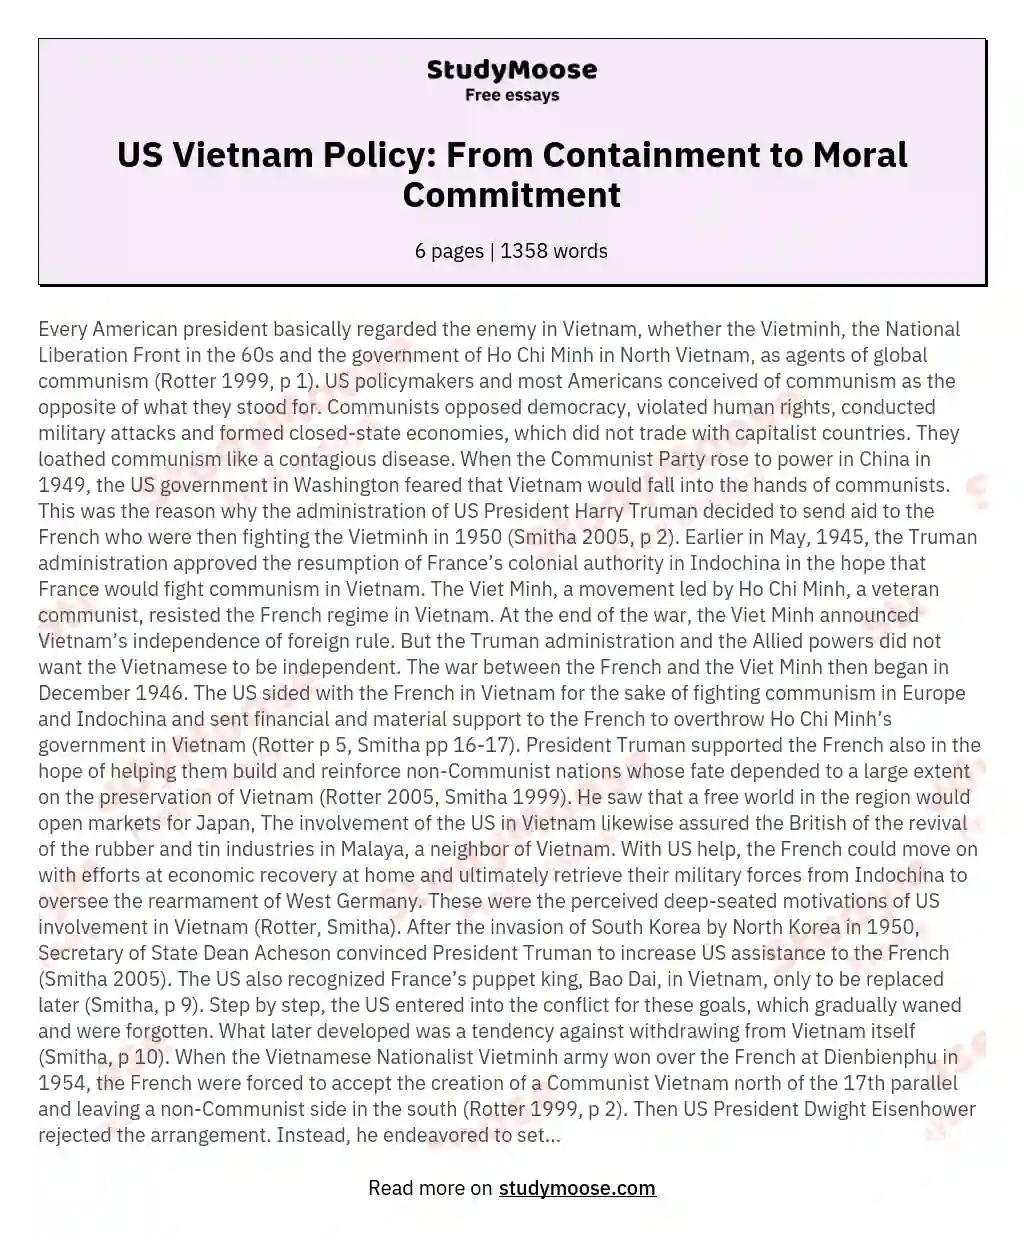 US Vietnam Policy: From Containment to Moral Commitment essay